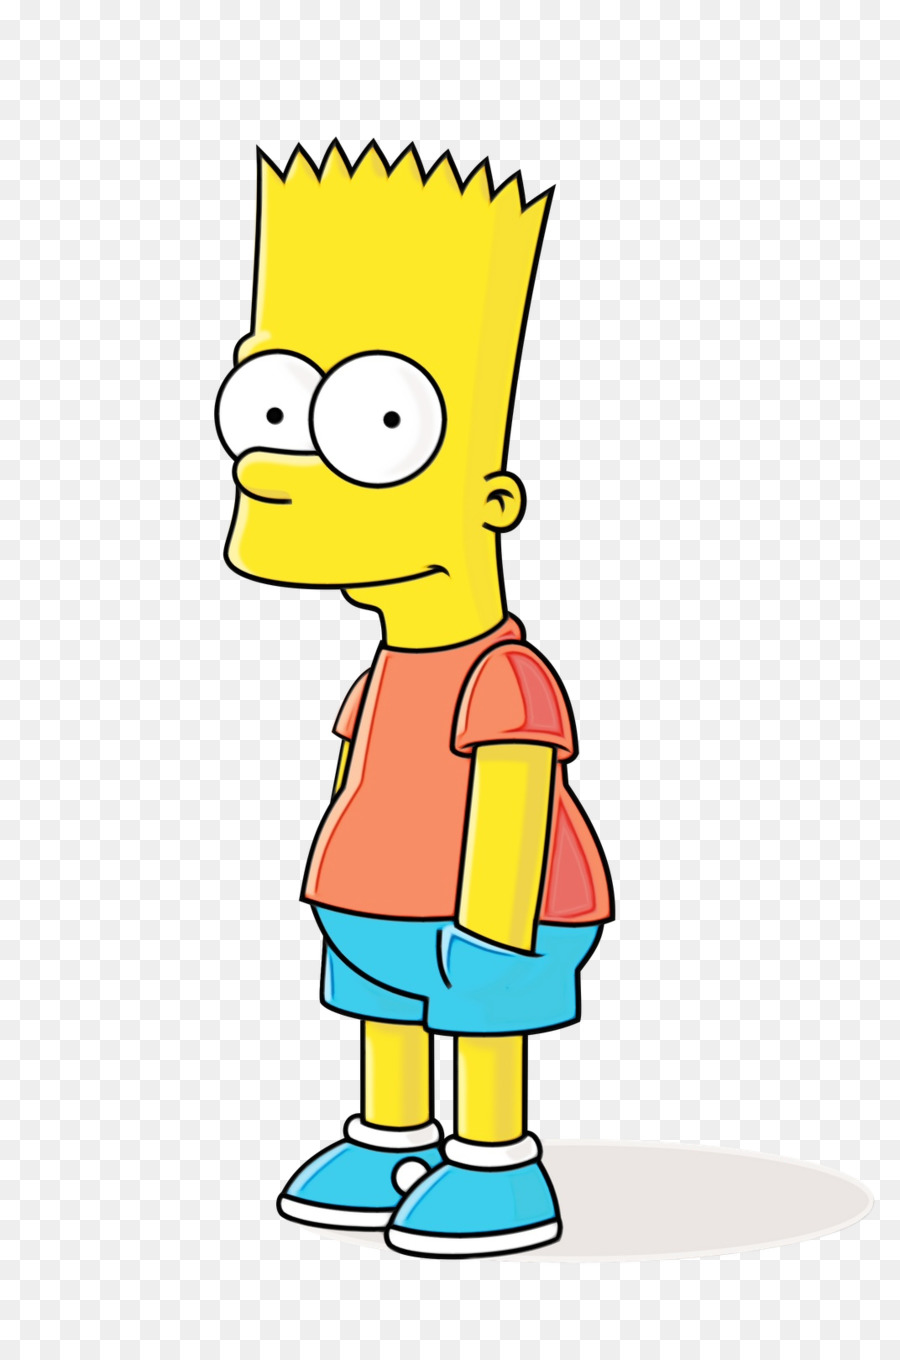 Homer Simpson Bart Simpson Marge Simpson Portable Network Graphics Lisa Simpson -  png download - 1072*1600 - Free Transparent Homer Simpson png Download.